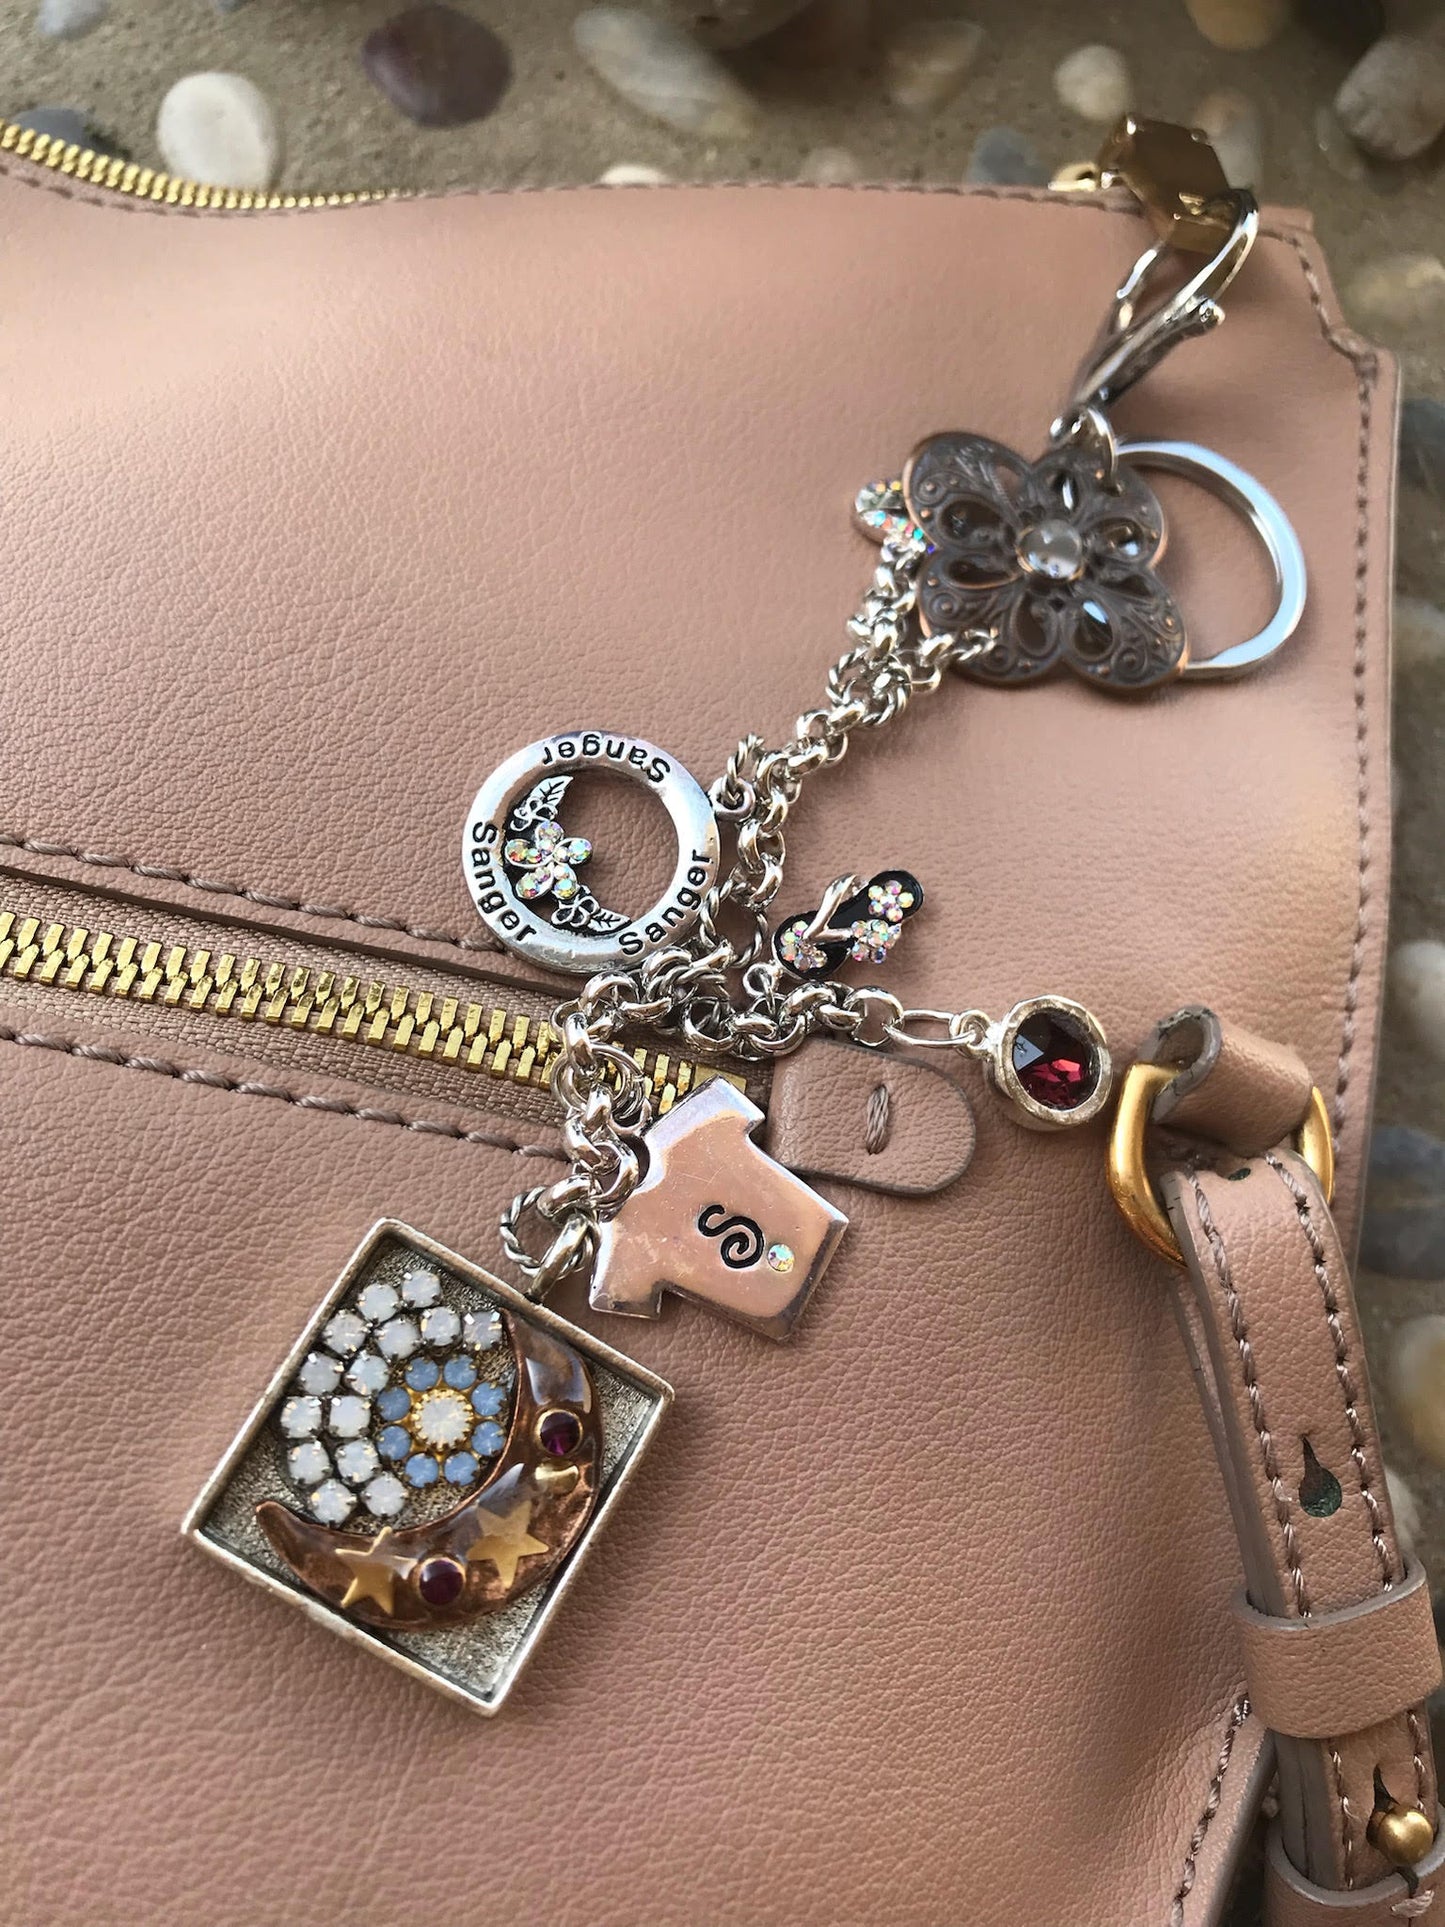 Westfield Stratford City - And bags, purses and bag charms for women ❤️ |  Facebook